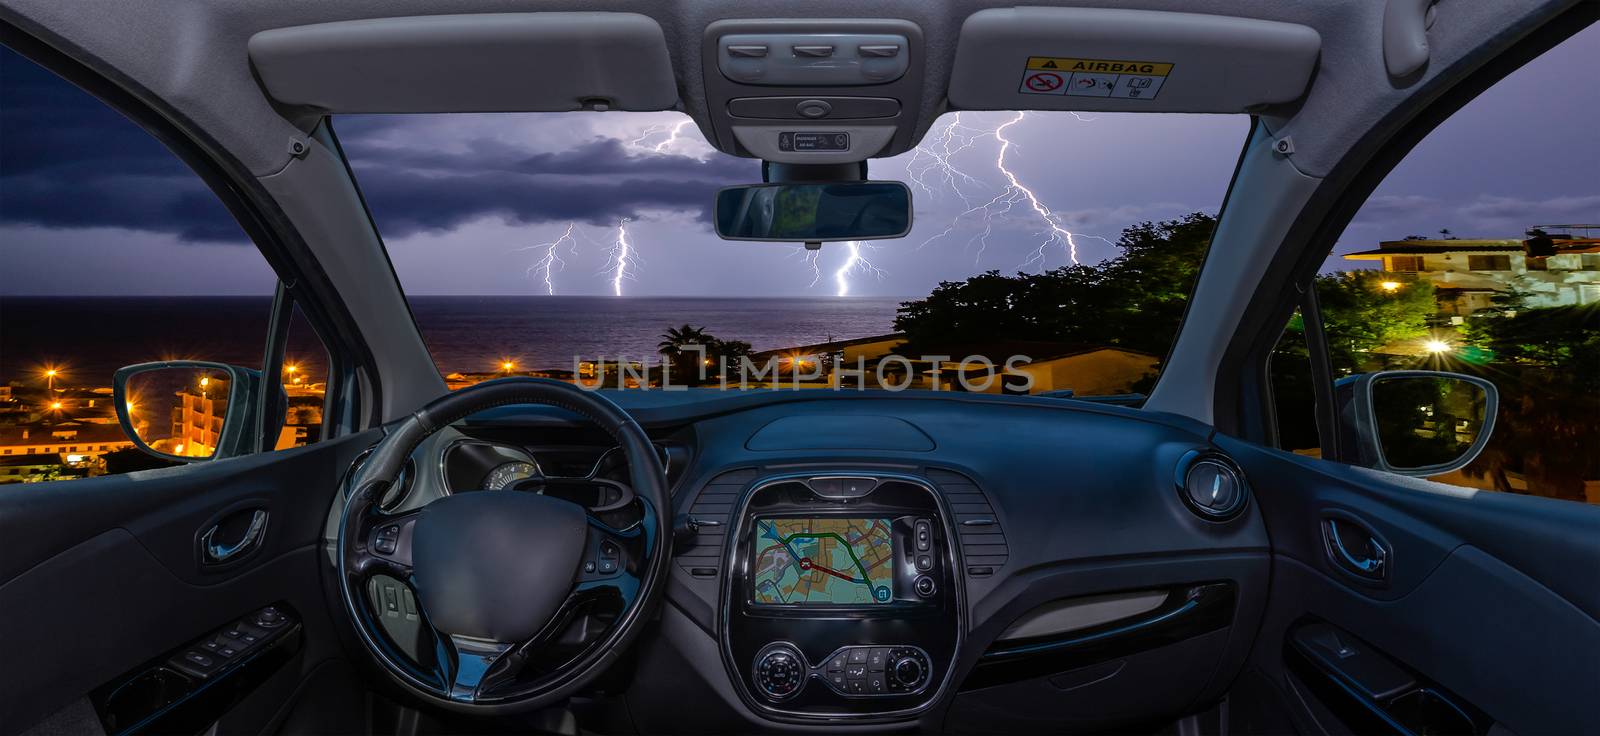 Looking through a car windshield with view over lightning storm over the sea